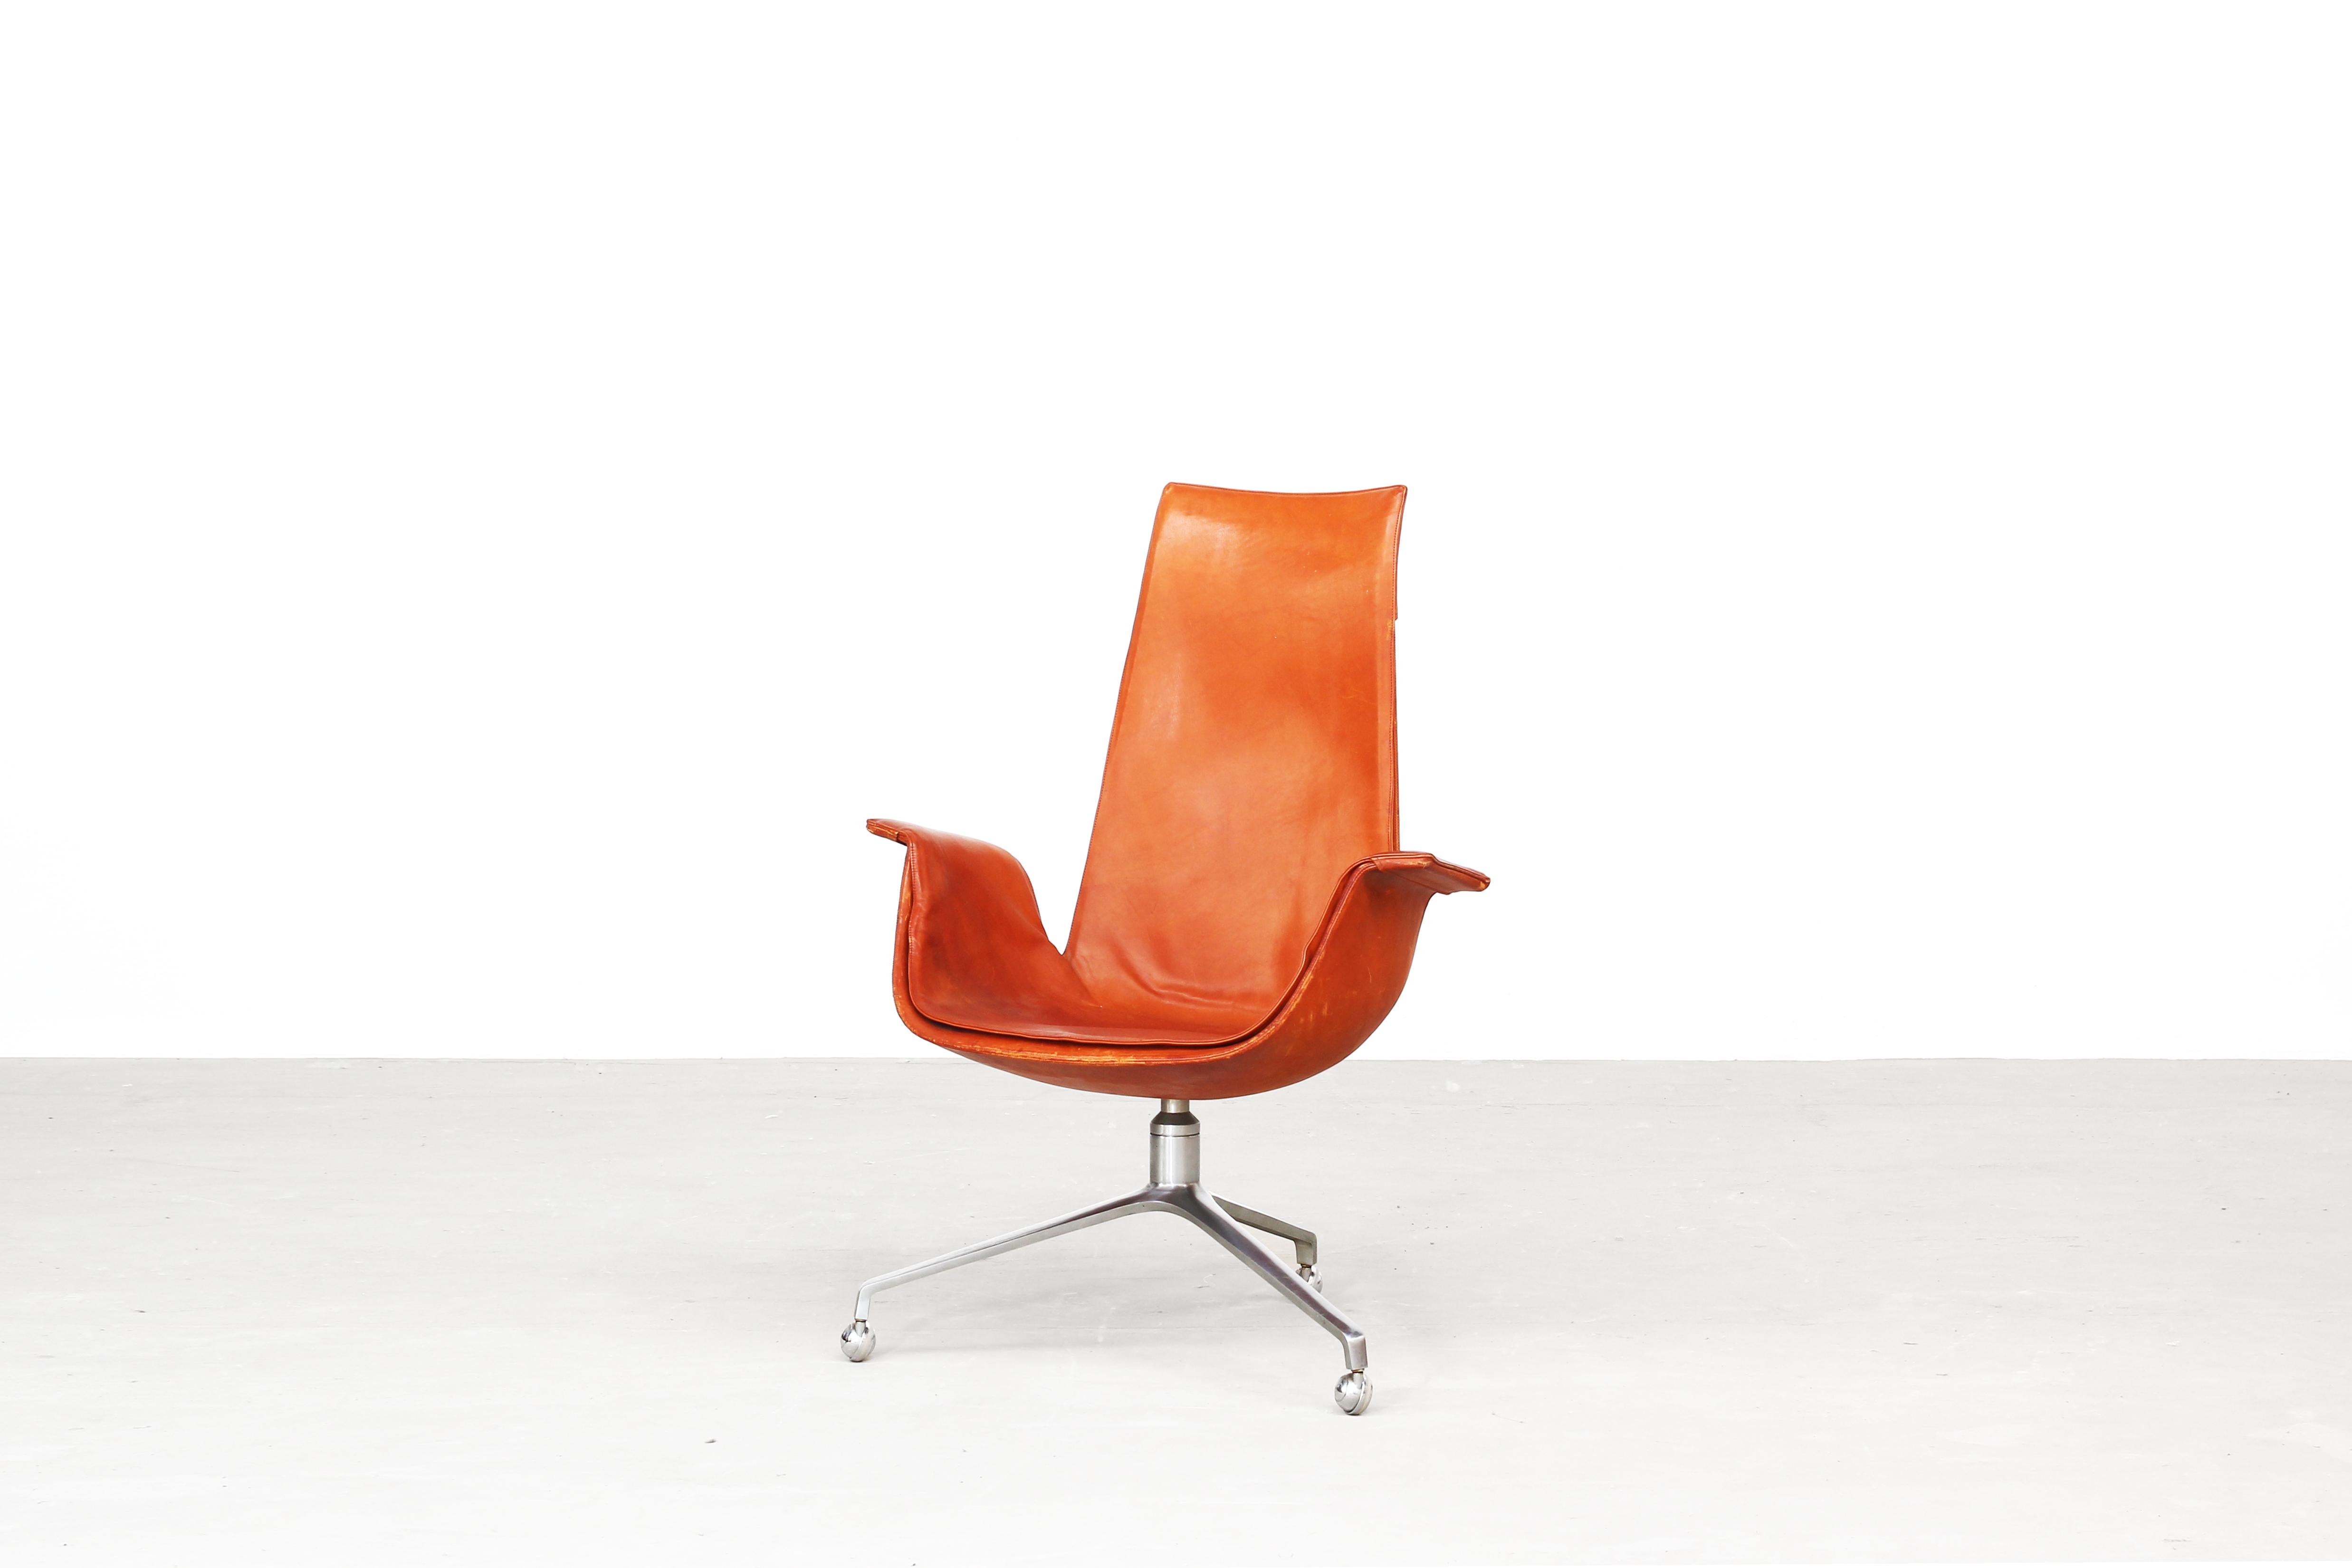 Original Tulip chair, as office chair, designed by Fabricius & Kastholm and produced by Alfred Kill International in the late 60ies in Germany. The chair comes in an original condition with patinated leather in brown cognac. Beautiful condition with